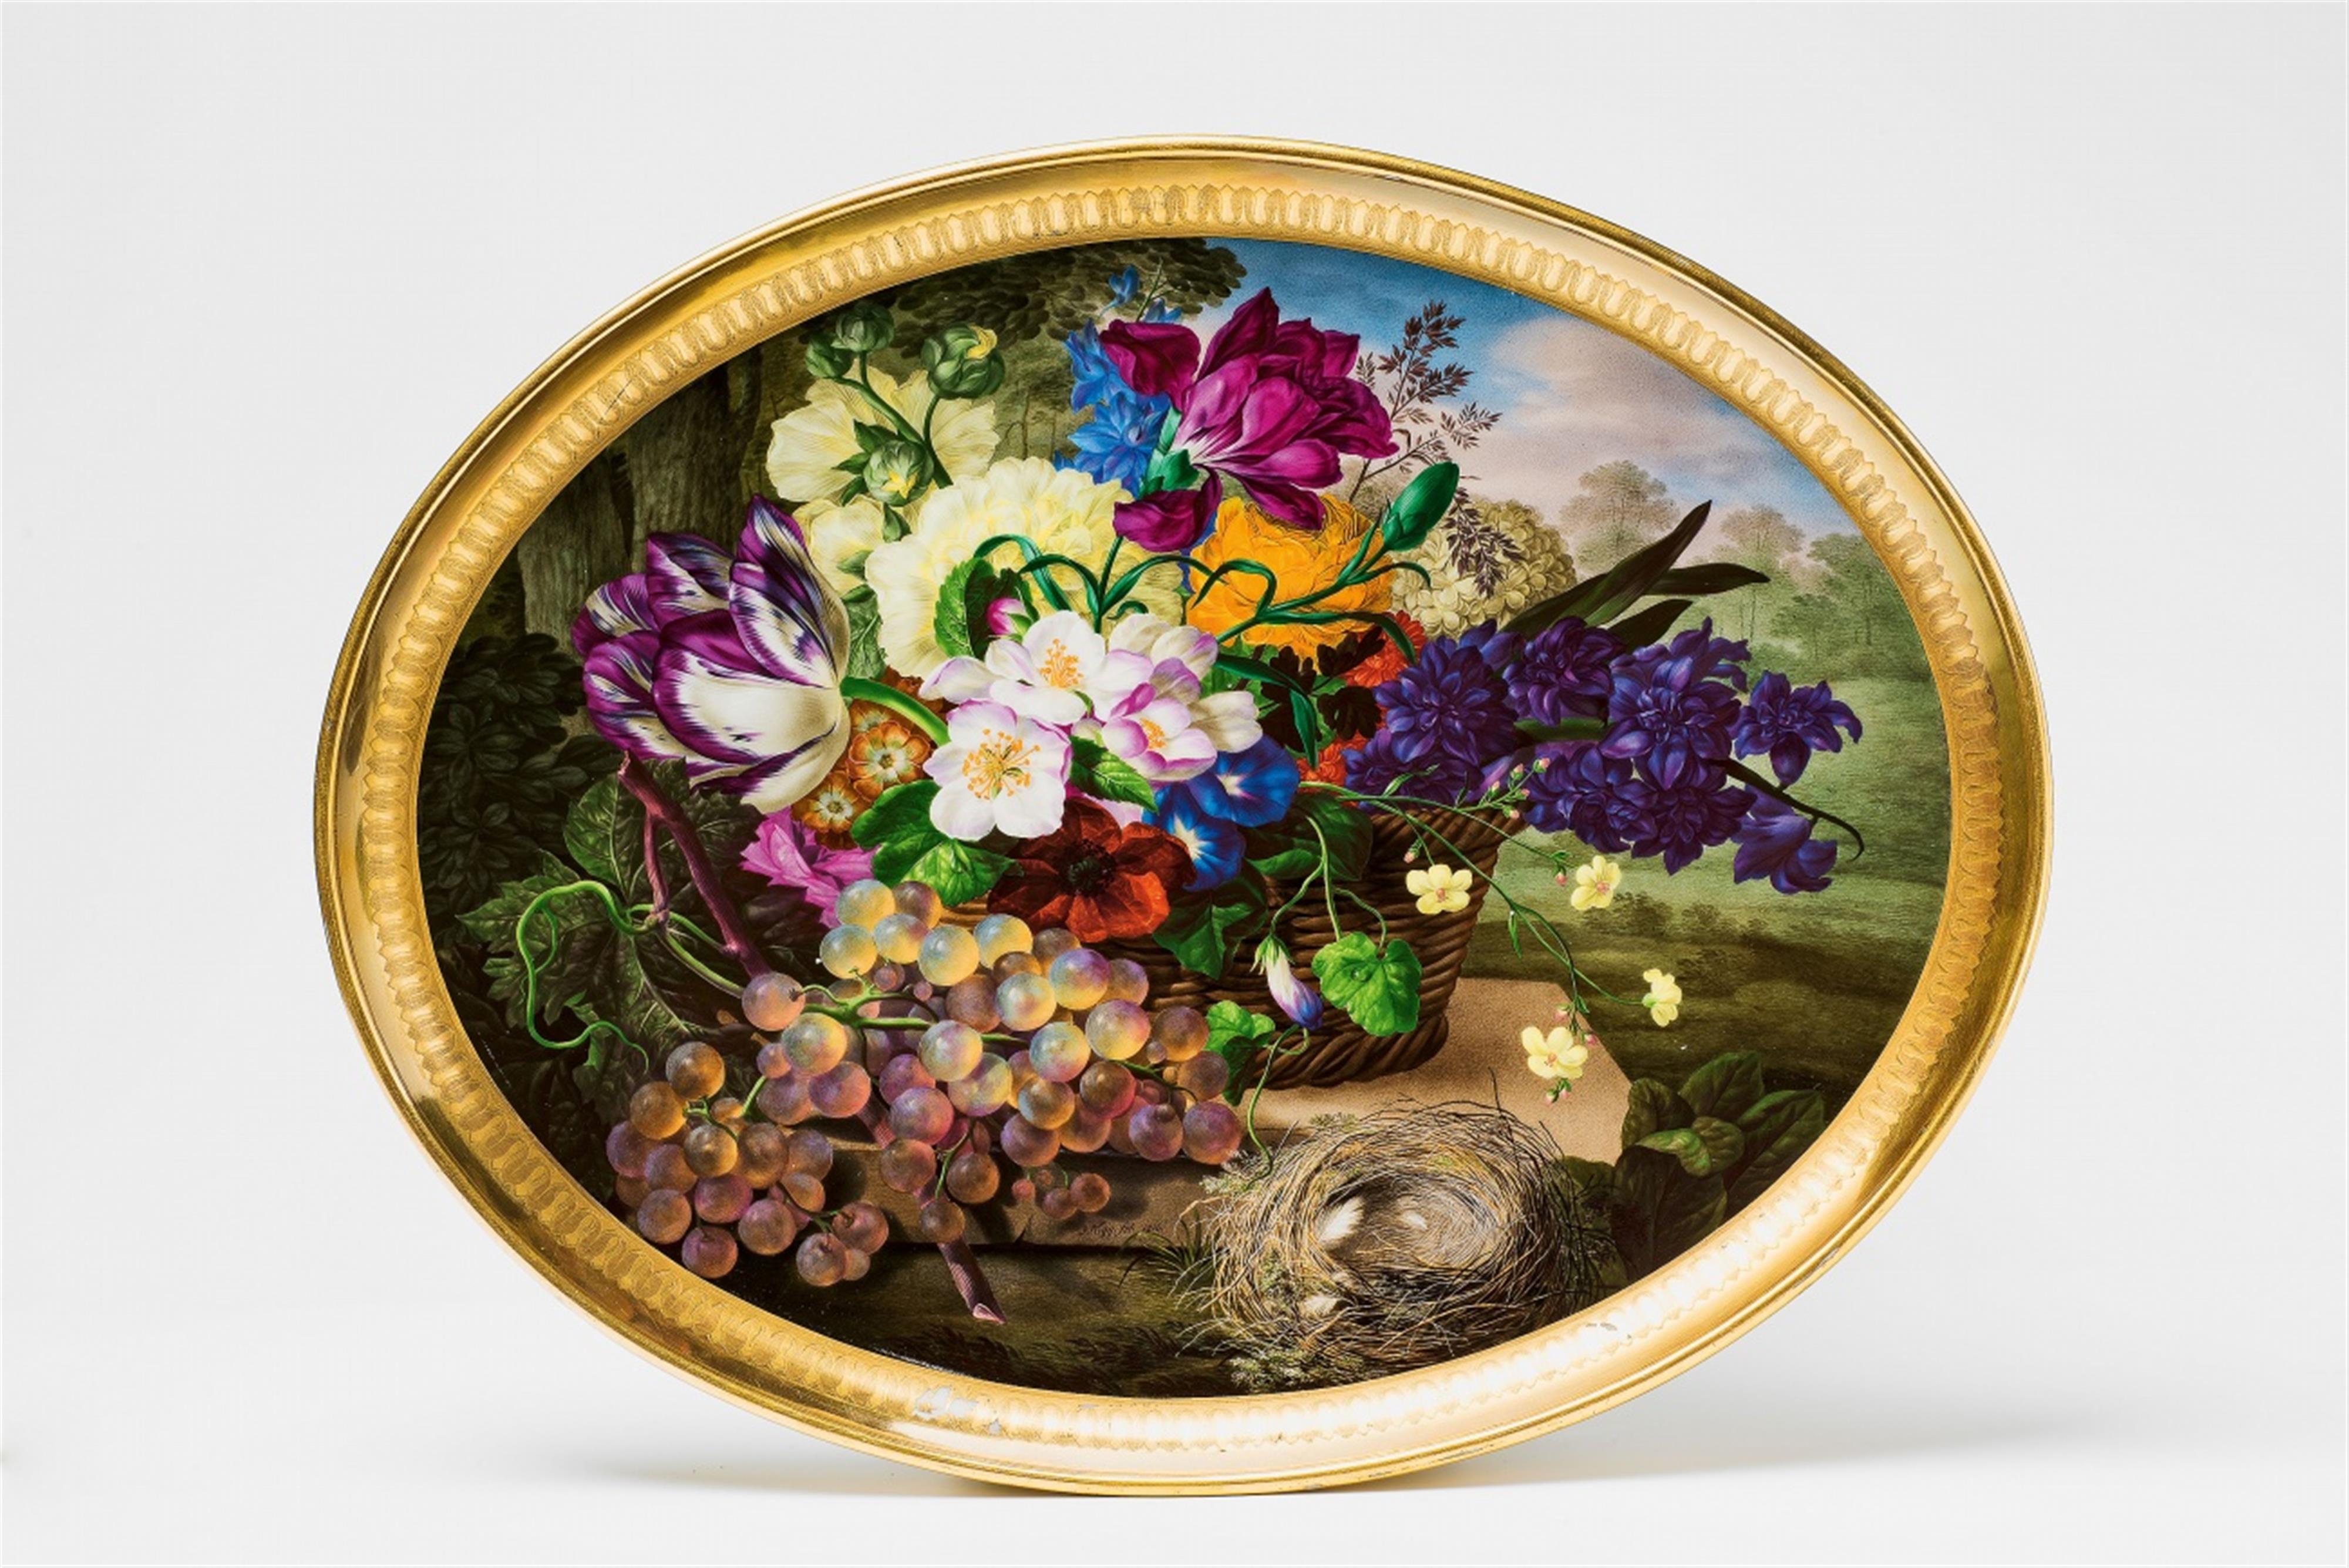 A Vienna porcelain tray with a basket of flowers, grapes, and a bird's nest - image-1